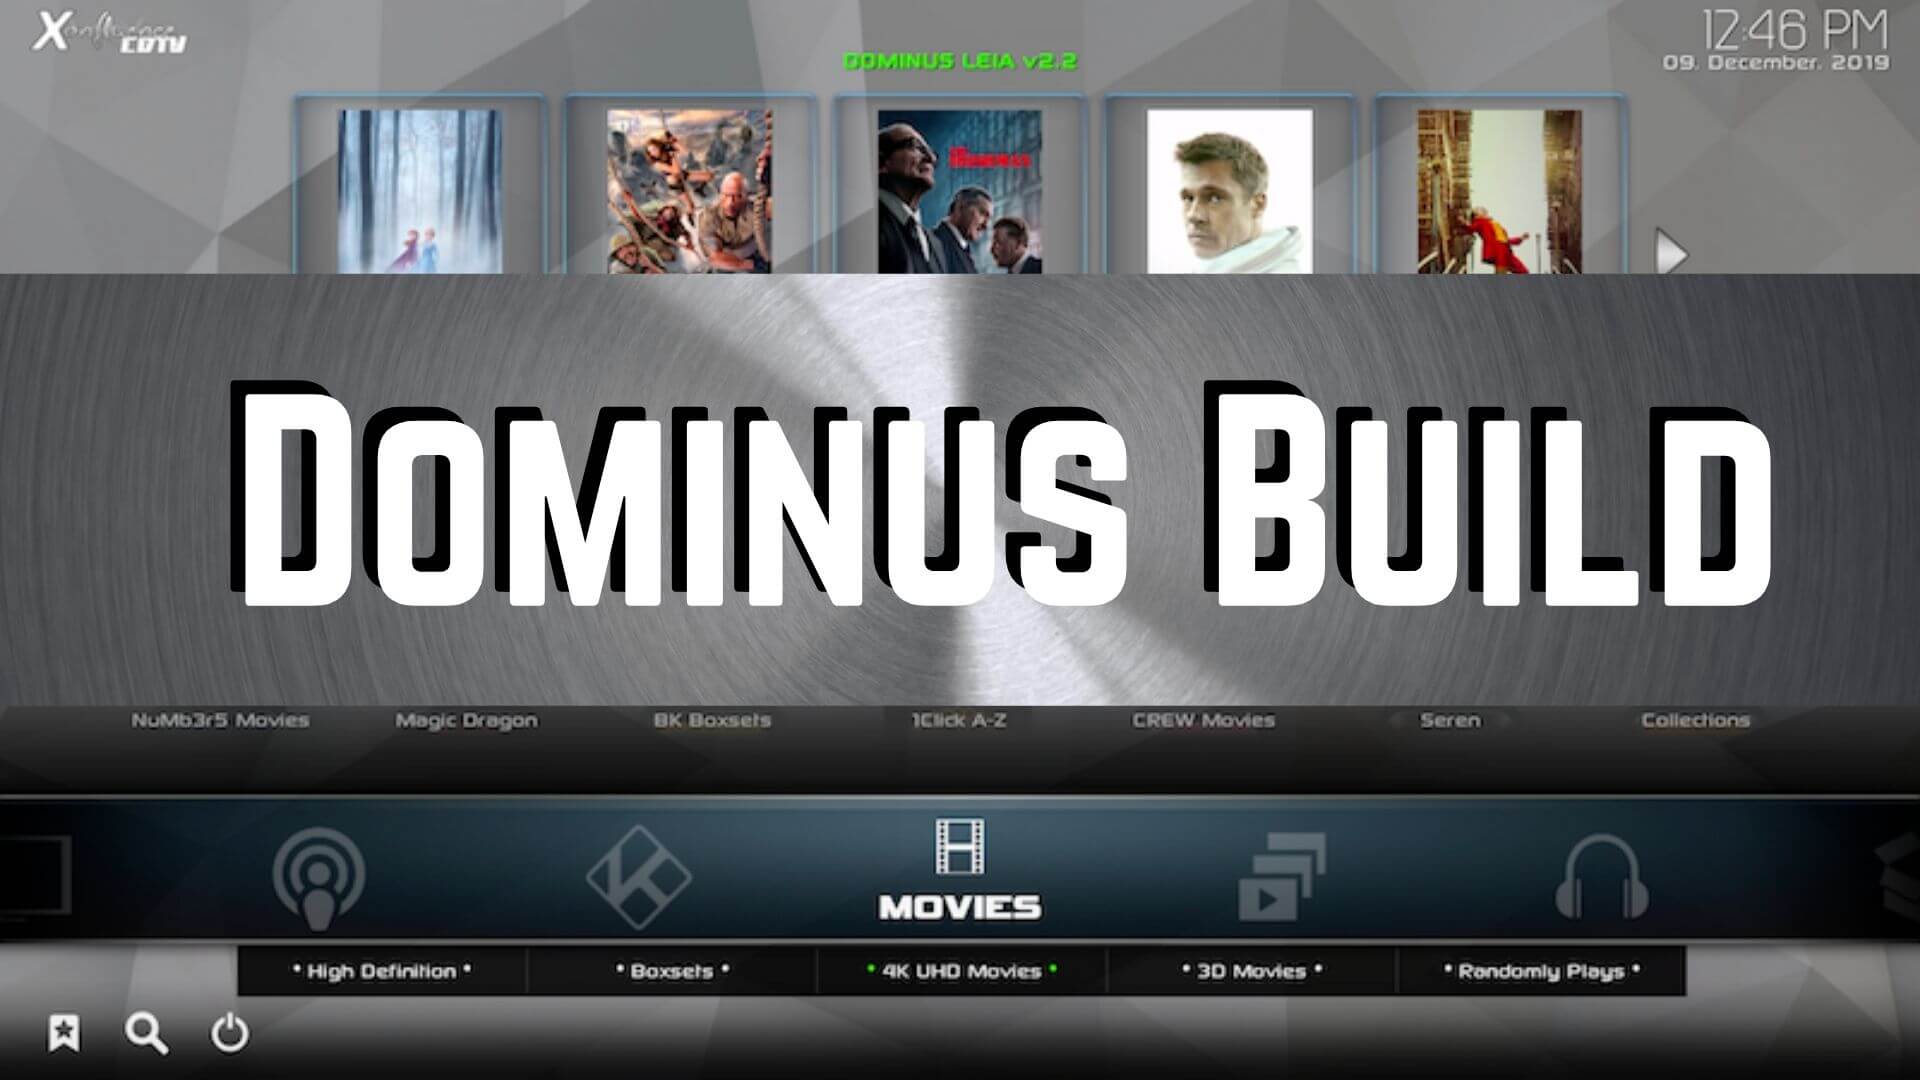 How to Install & Use Dominus Build on Kodi Devices